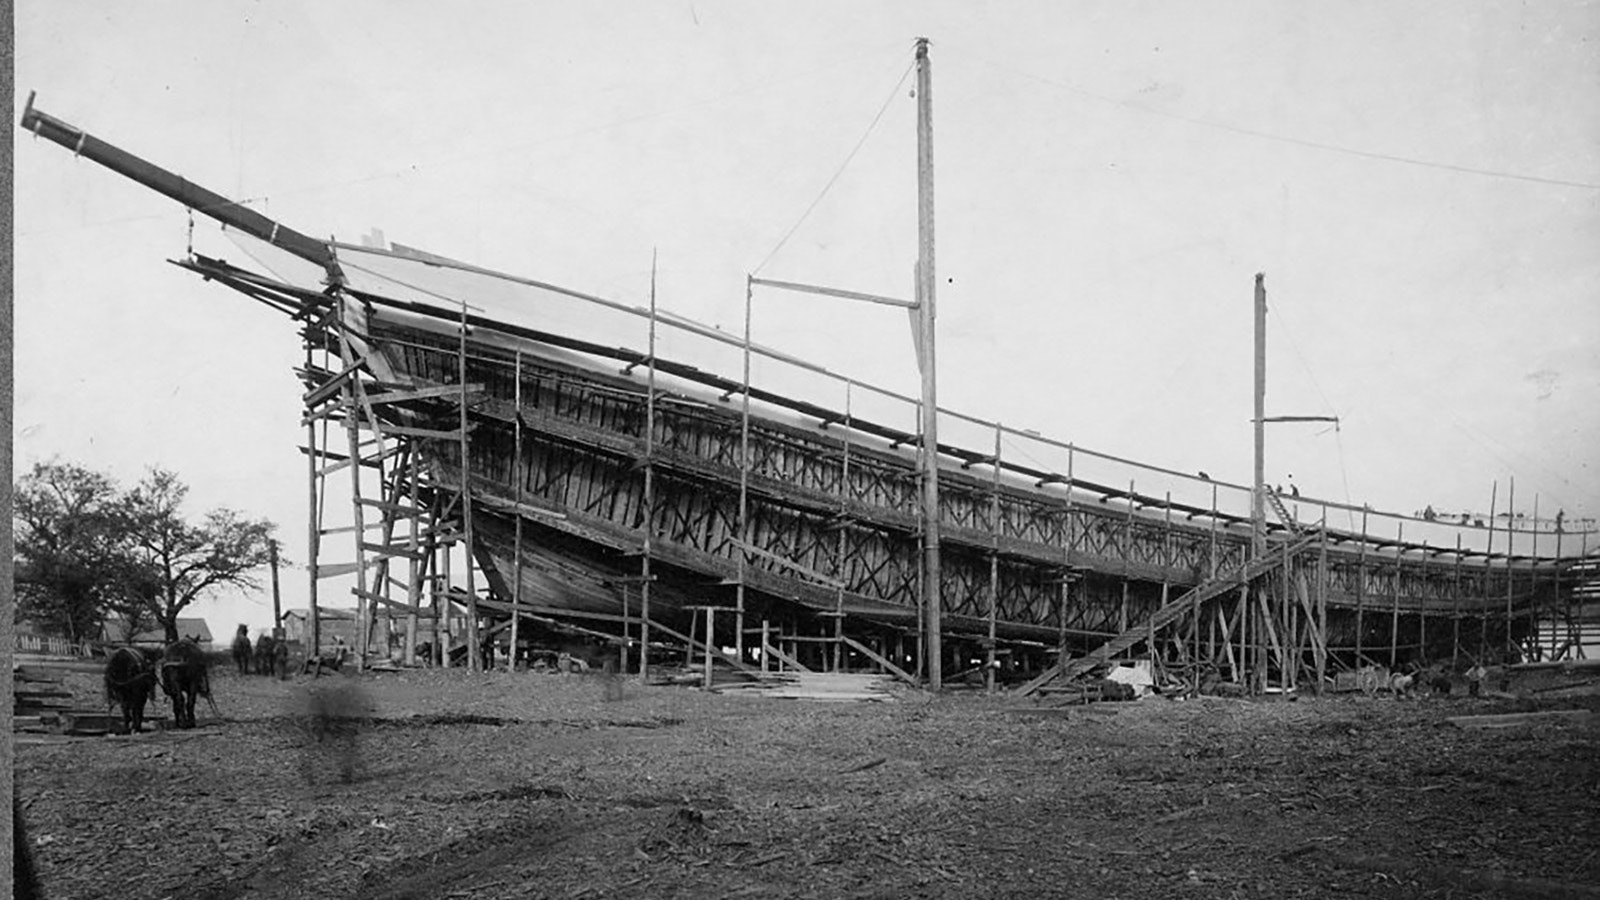 The Wyoming under construction at the Percy and Small Shipyard in Bath, Maine.